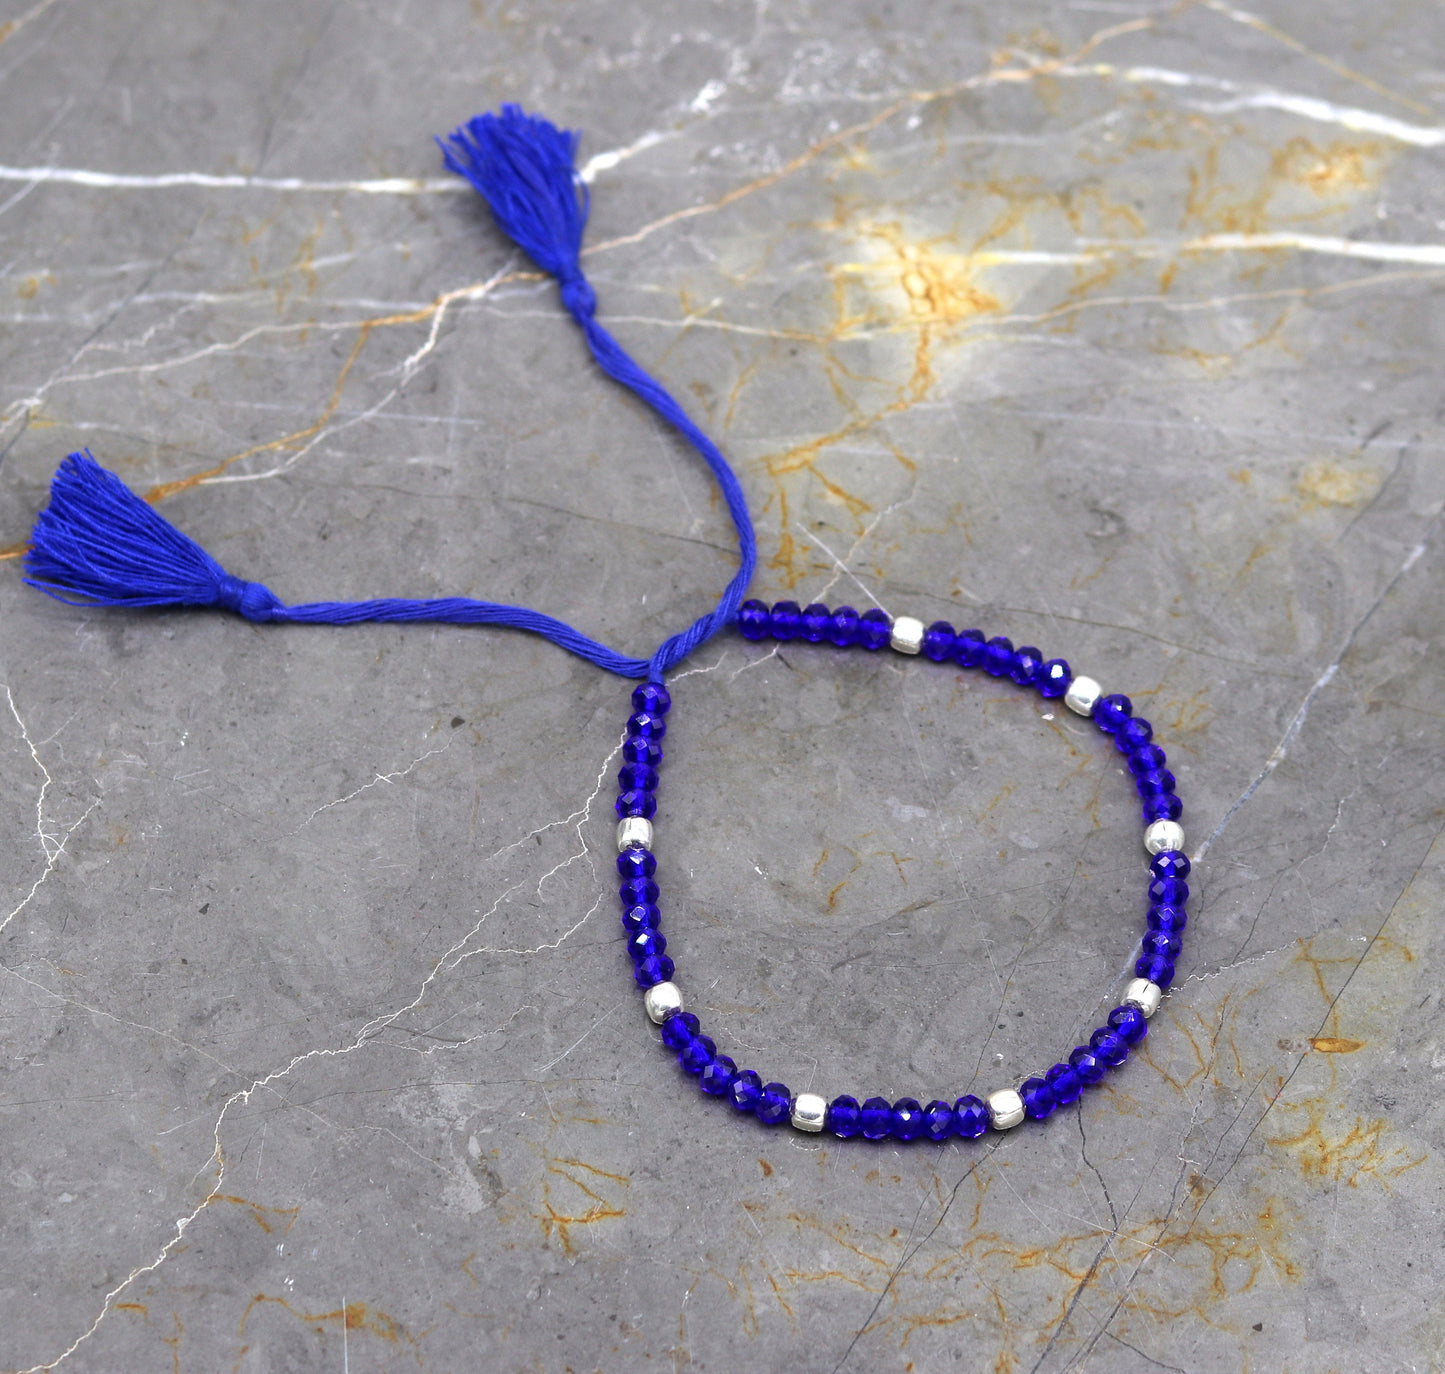 Exclusive threads anklets semi precious blue stone and 925 silver beads, custom made ankle bracelet, pretty modern beaded jewelry ank250 - TRIBAL ORNAMENTS